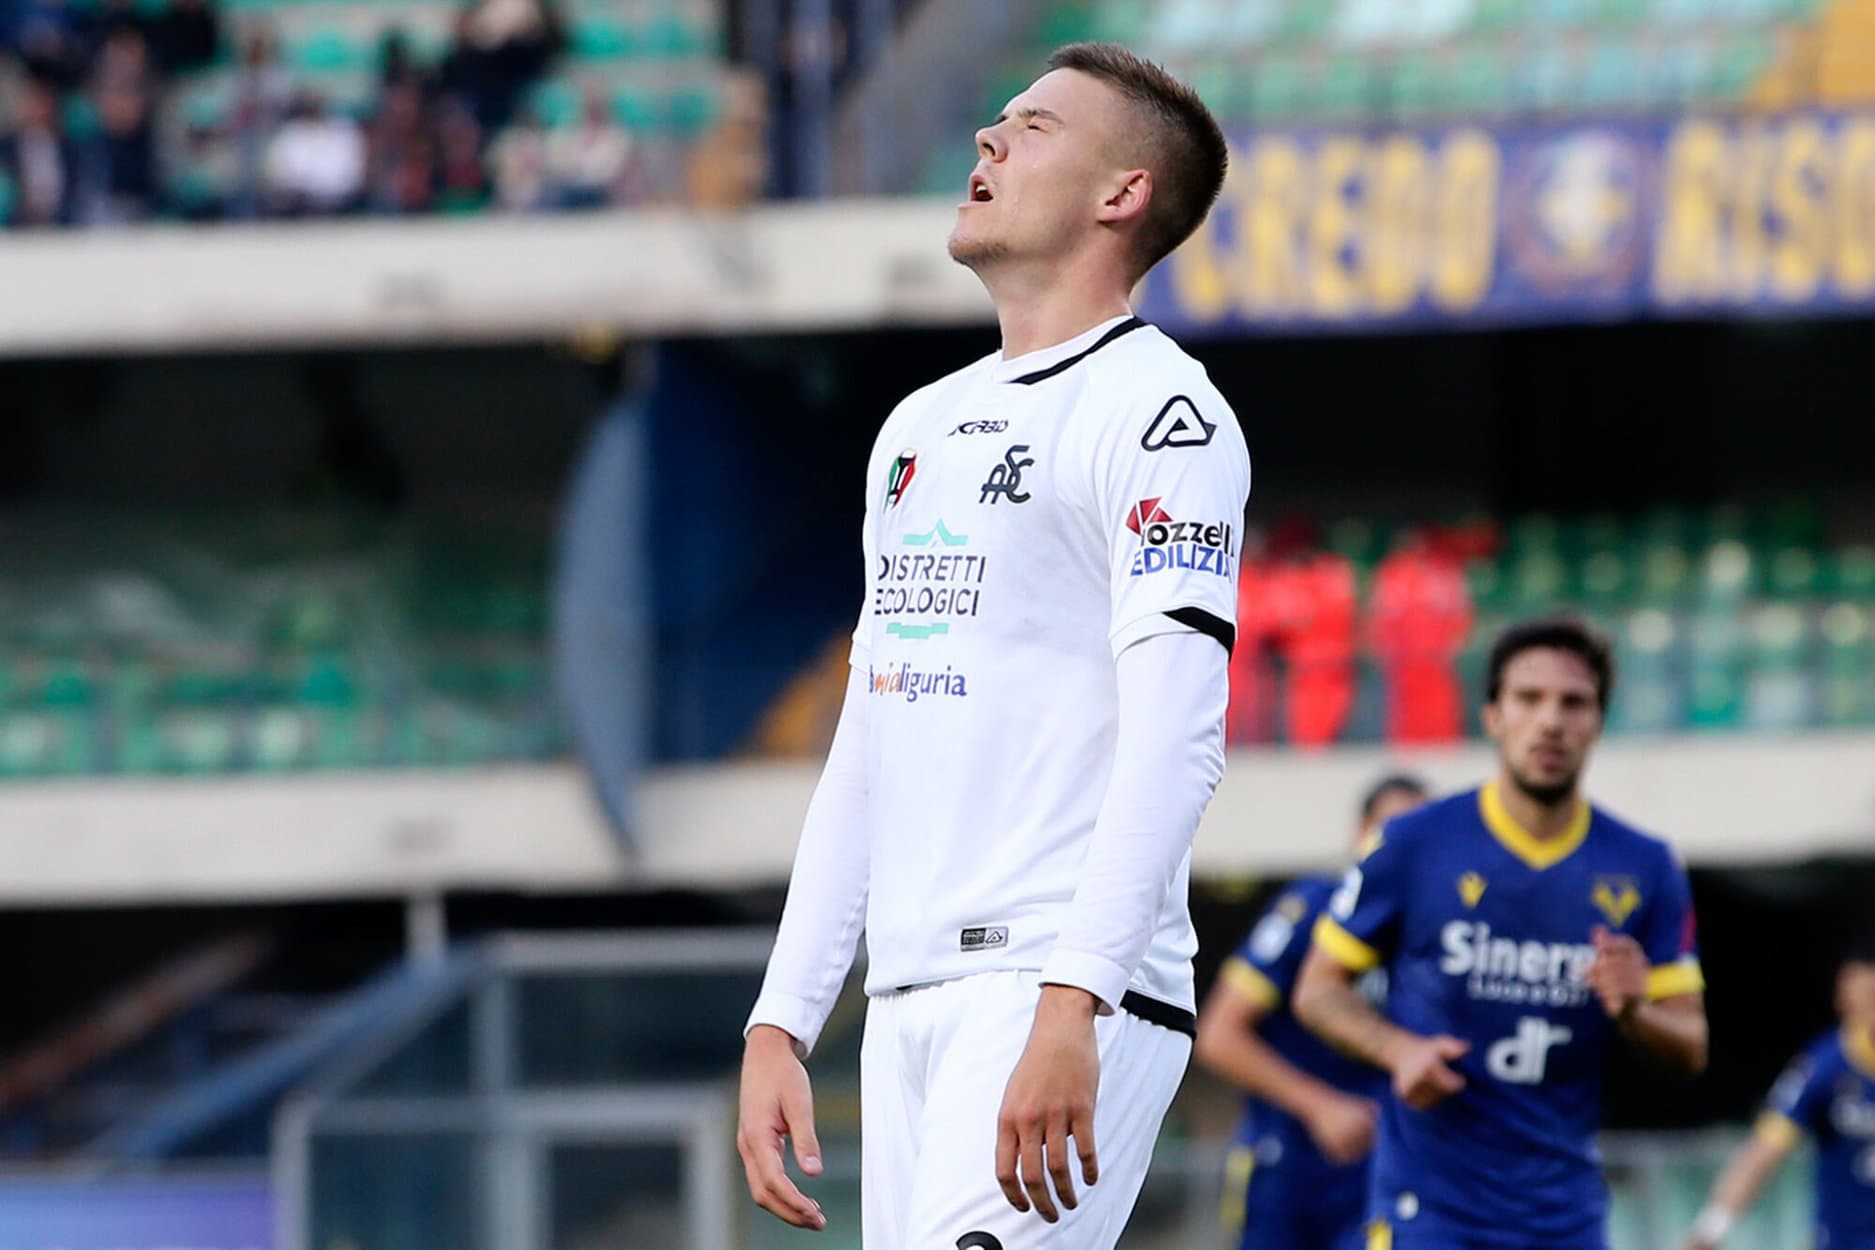 Two English clubs are joining the race to sign Emil Holm from Spezia